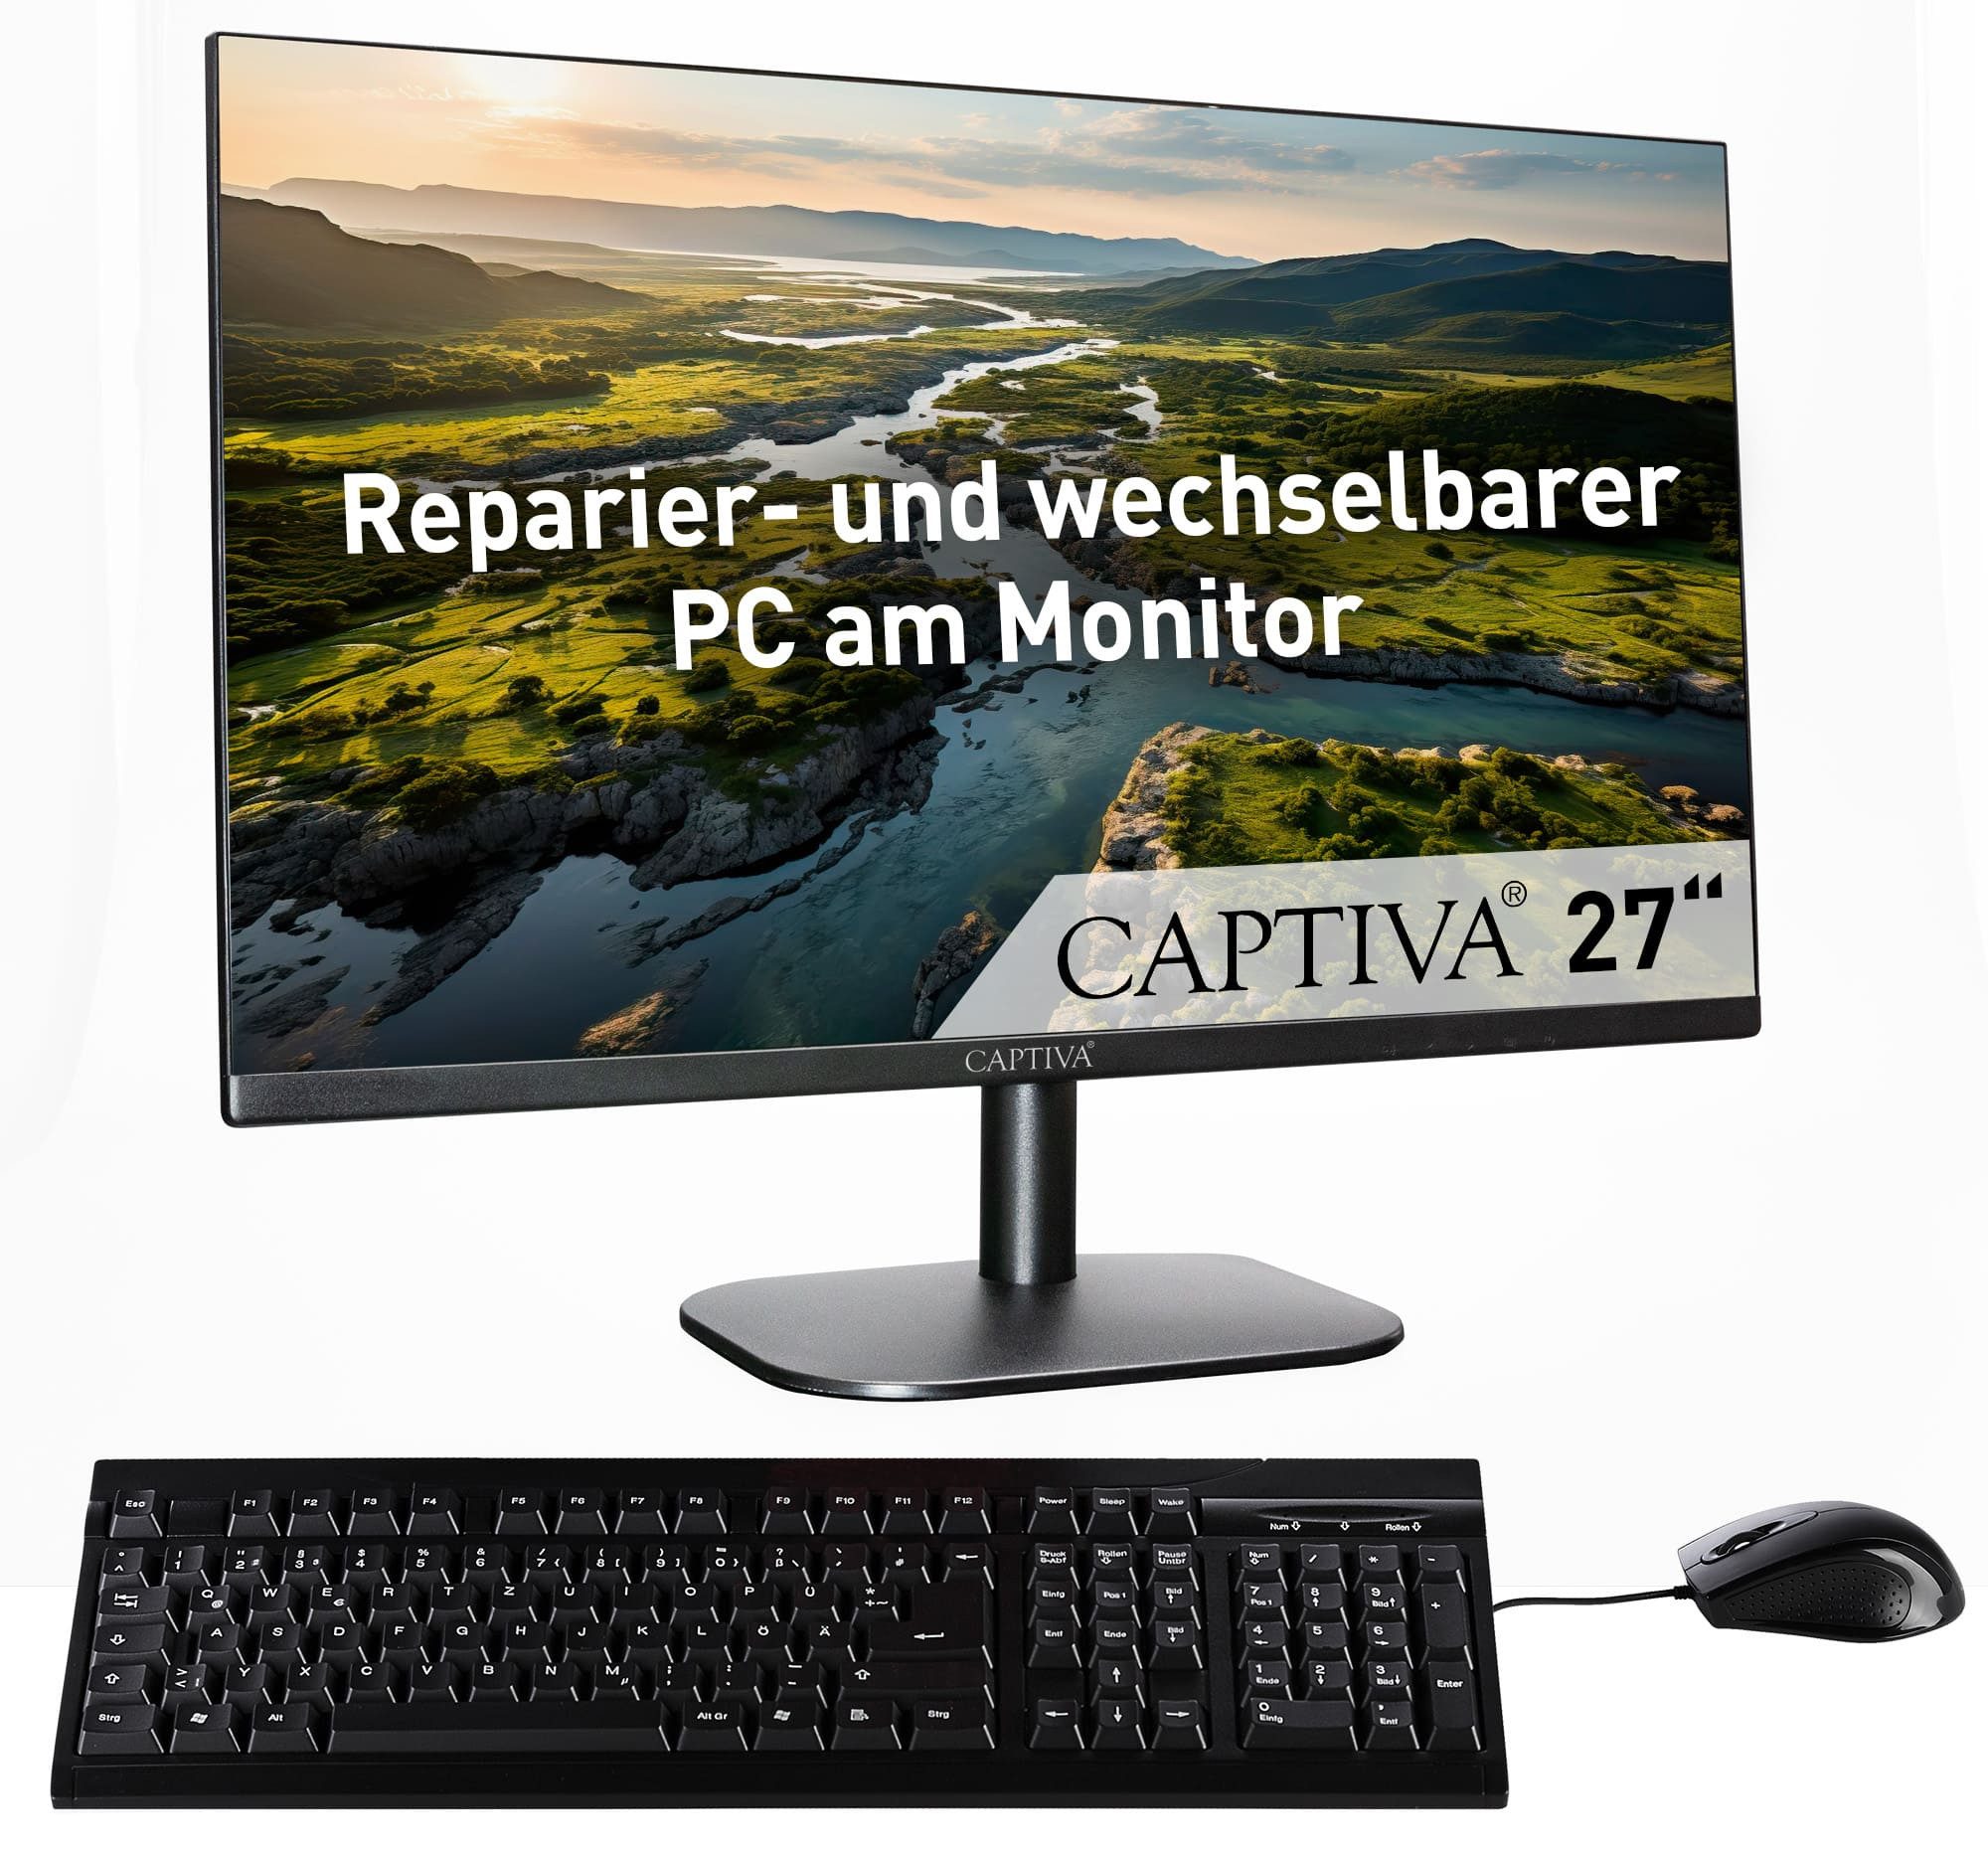 CAPTIVA All-In-One Power Starter I82-298 All-in-One PC (27 Zoll, Intel® Core i7 1260P, -, 8 GB RAM, 500 GB SSD, Luftkühlung)